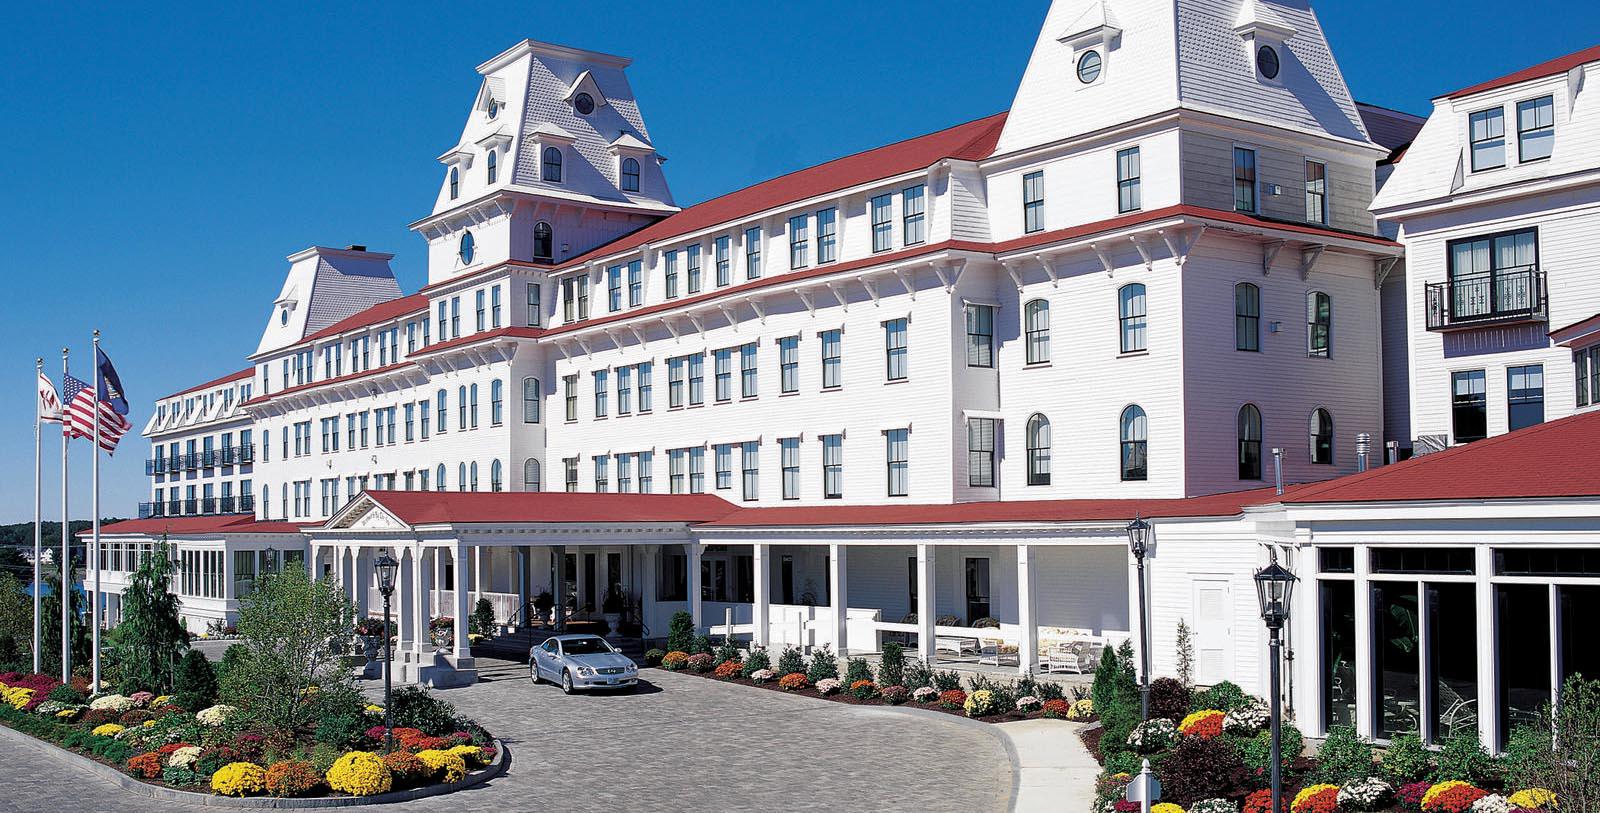 Image of Hotel Exterior, Wentworth by the Sea, New Castle, New Hampshire, 1874, Member of Historic Hotels of America, Special Offers, Discounted Rates, Families, Romantic Escape, Honeymoons, Anniversaries, Reunions